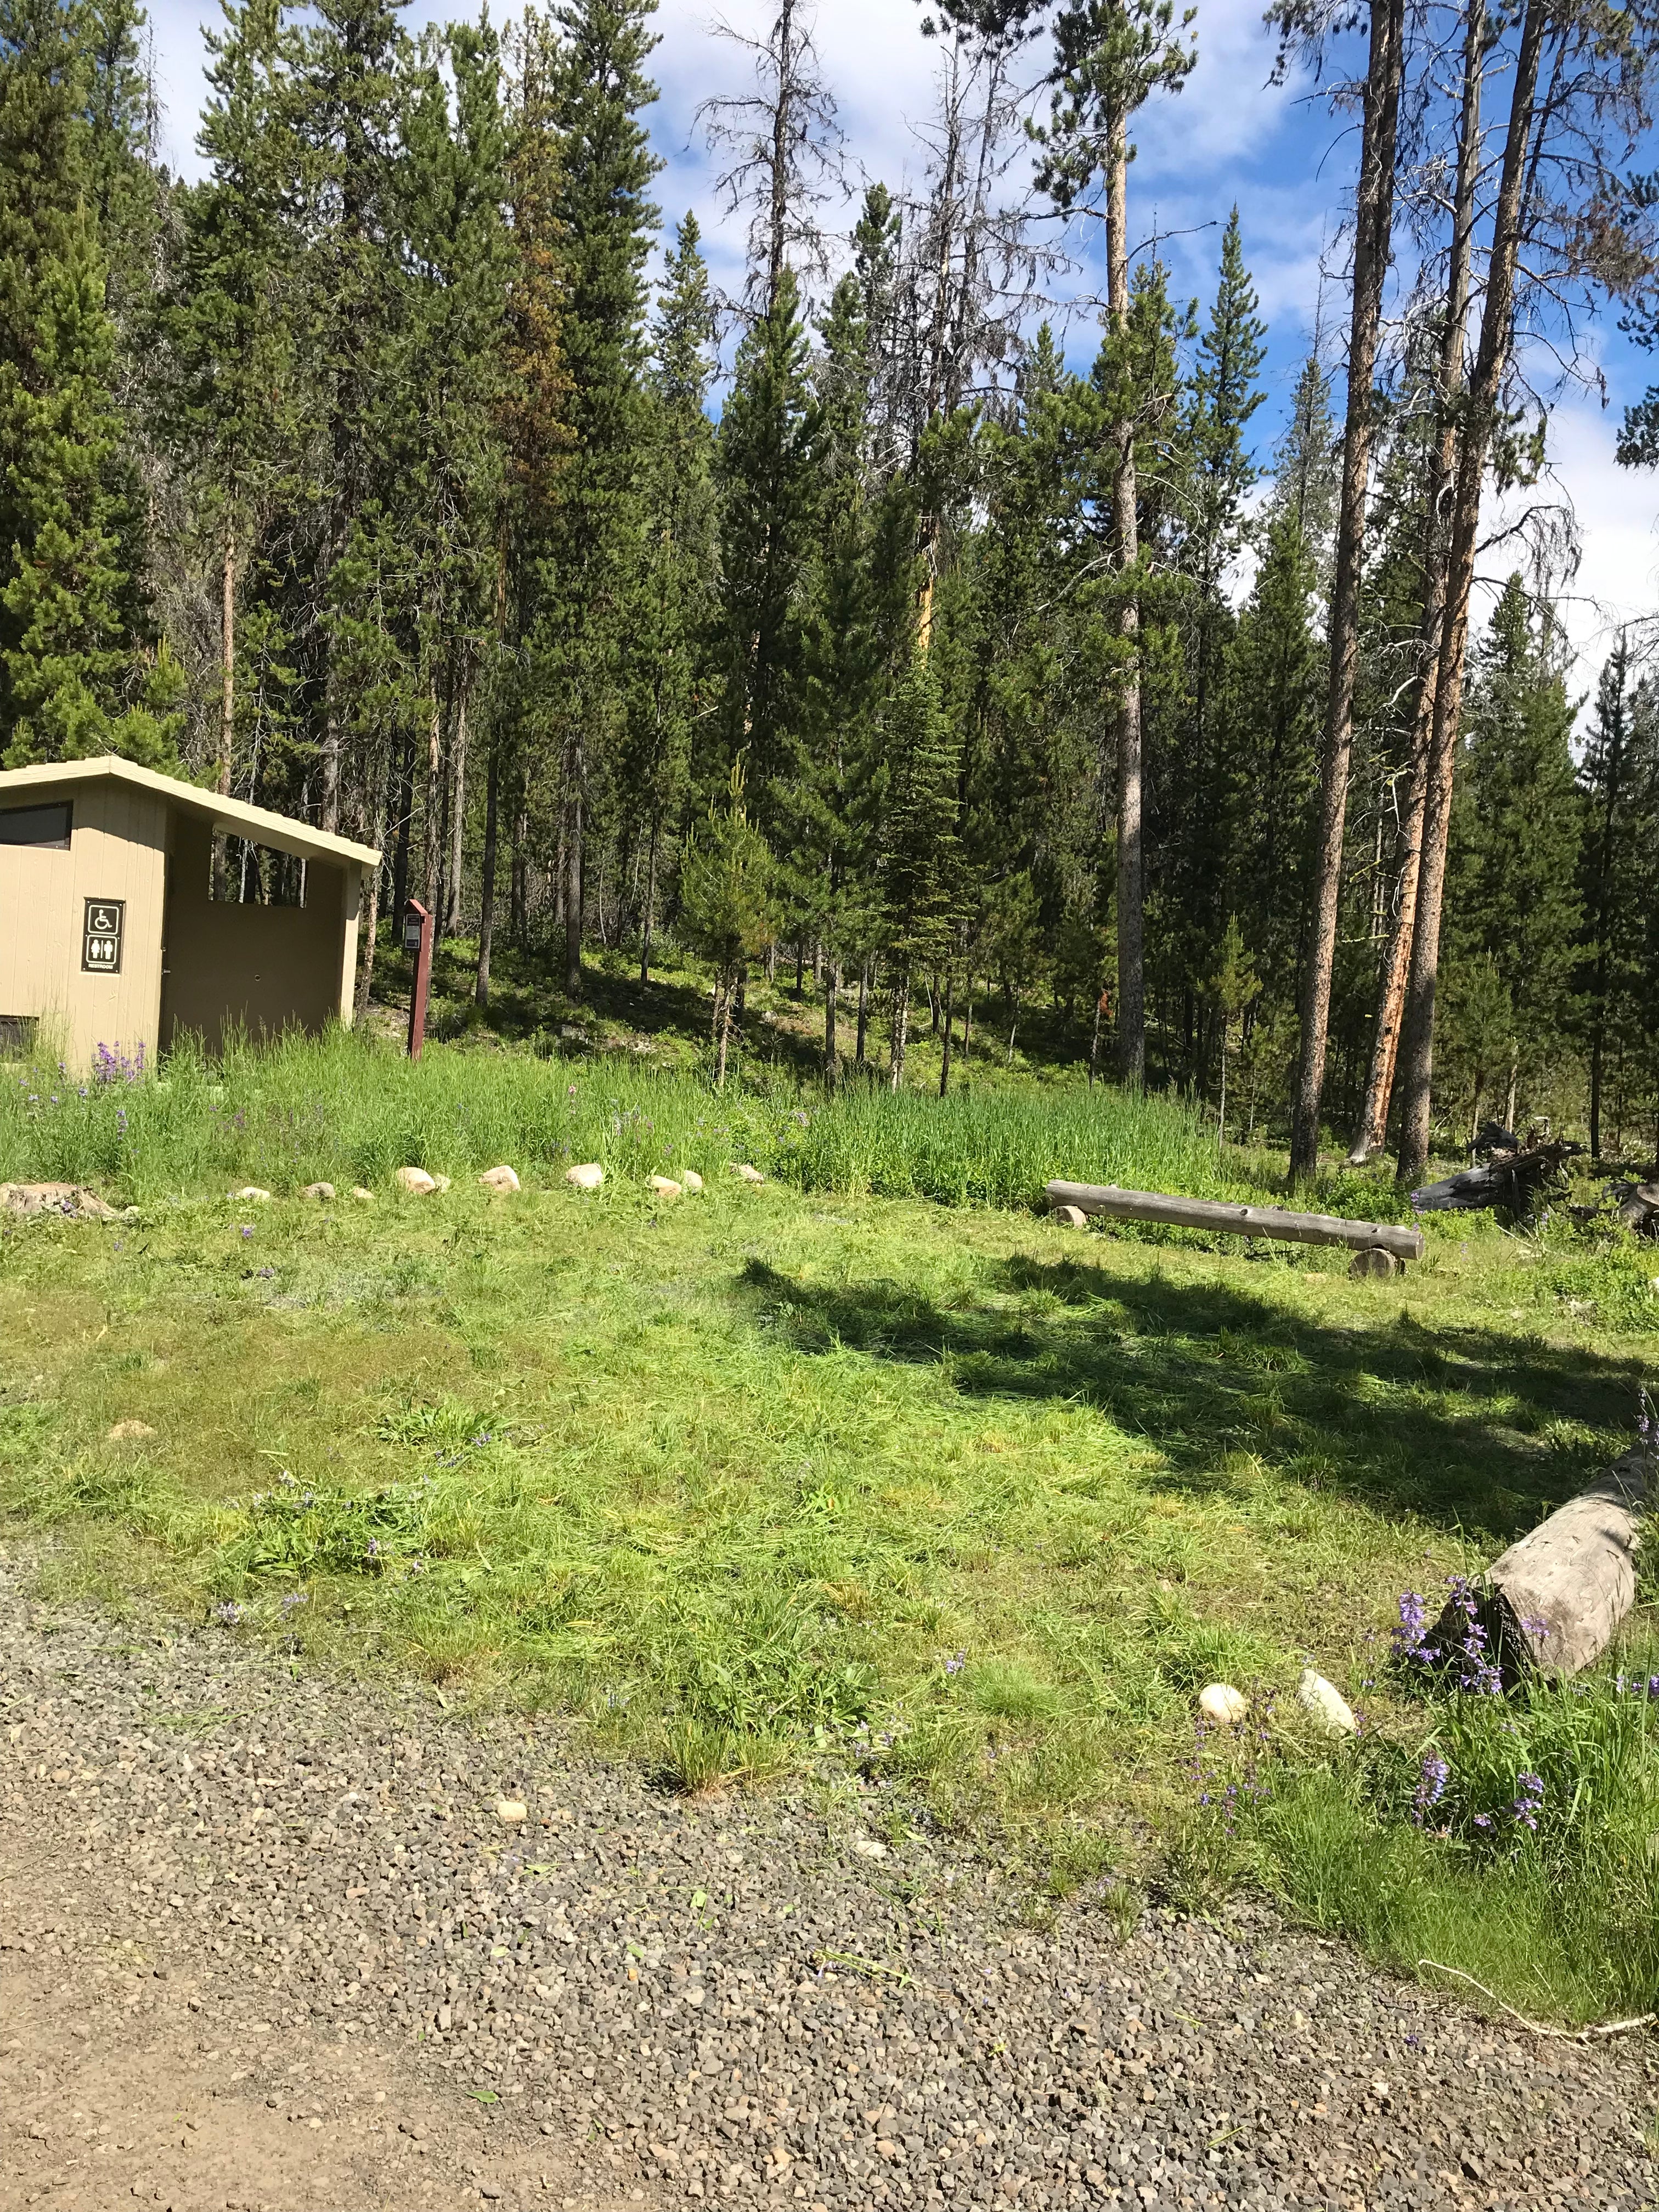 Camper submitted image from Lick Creek Area, McCall & Krassel Ranger Districts - 2